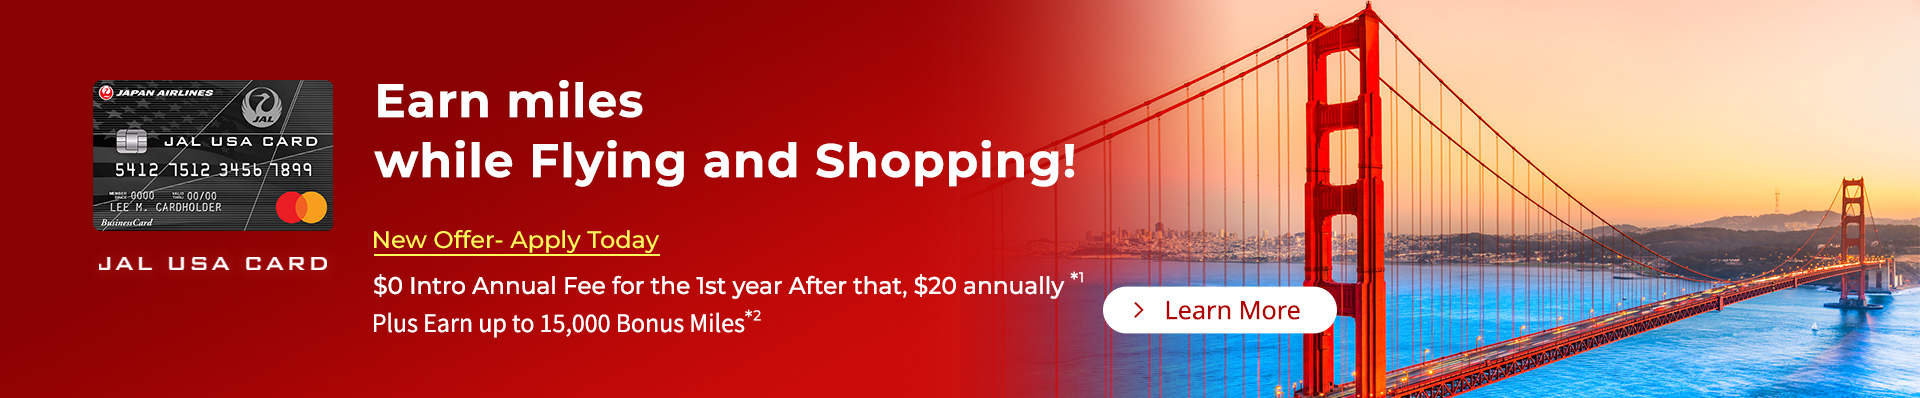 Earn Miles while Flying and Shopping! New Offer- Apply Today
 $0 Intro Annual Fee for the 1st year After that, $20 annually*1 Plus Earn up to 15,000 Bonus Miles*2 Learn more